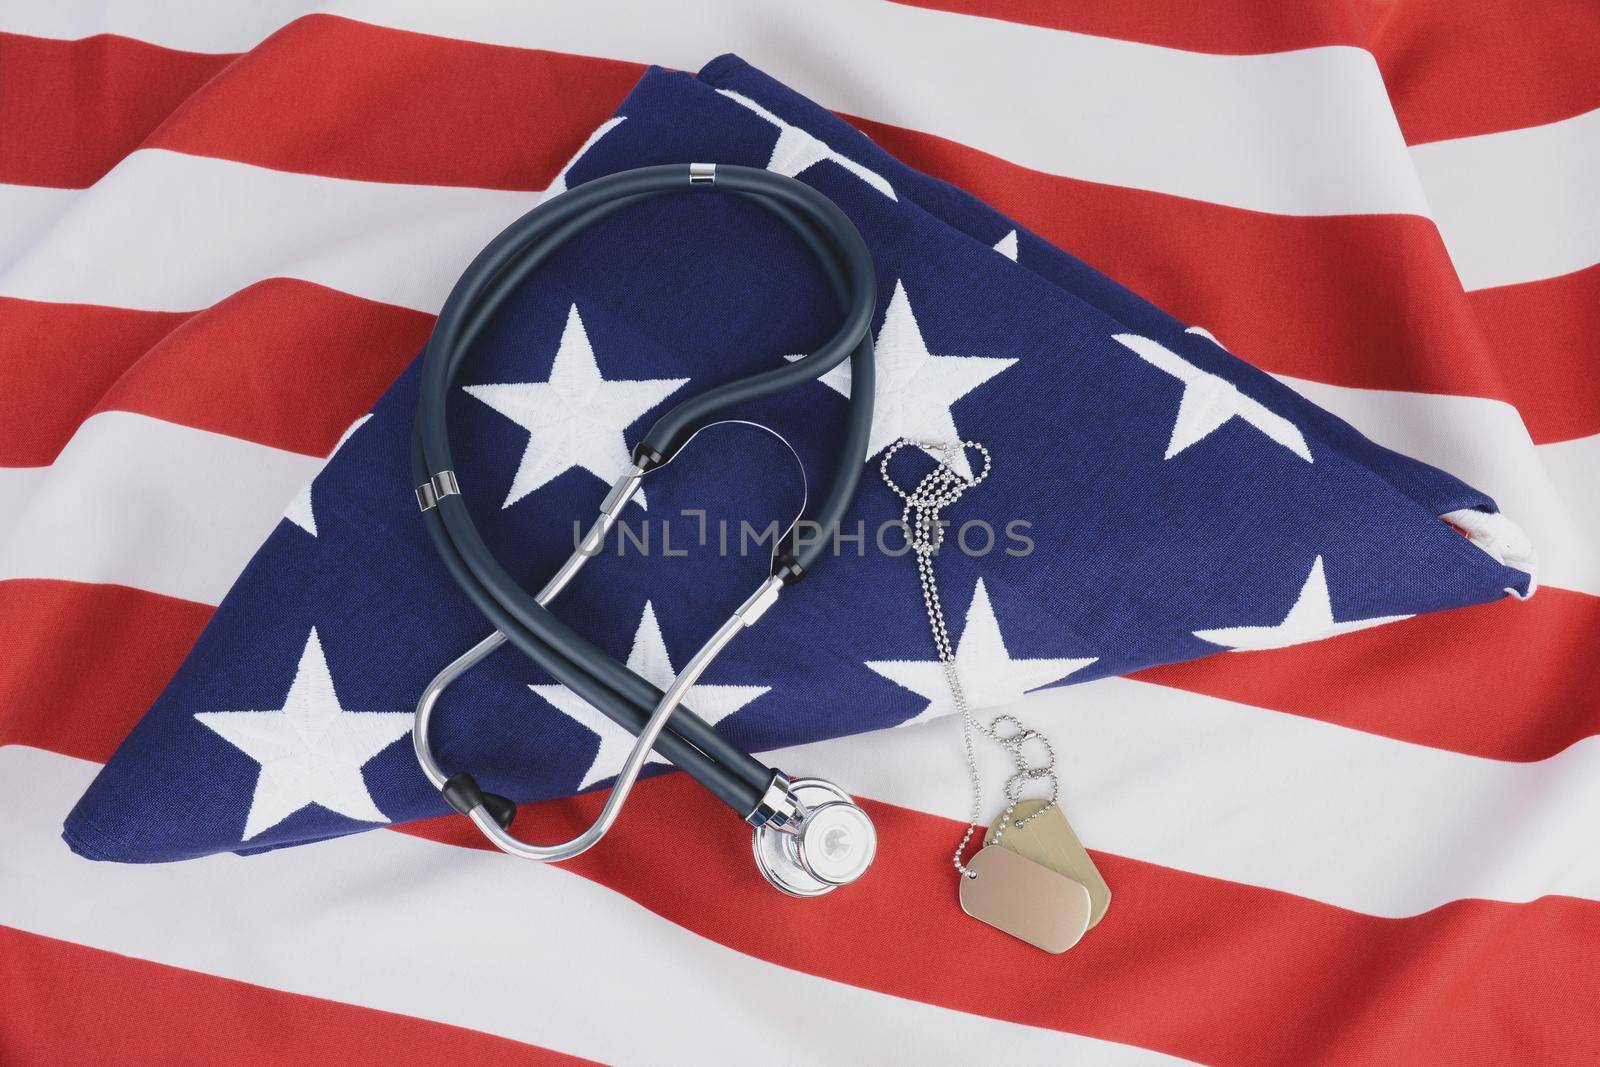 A stethoscope and dog tags on a folded American Flag. The background is the red and white stripes of another flag. Ideal for Military Health care concepts.